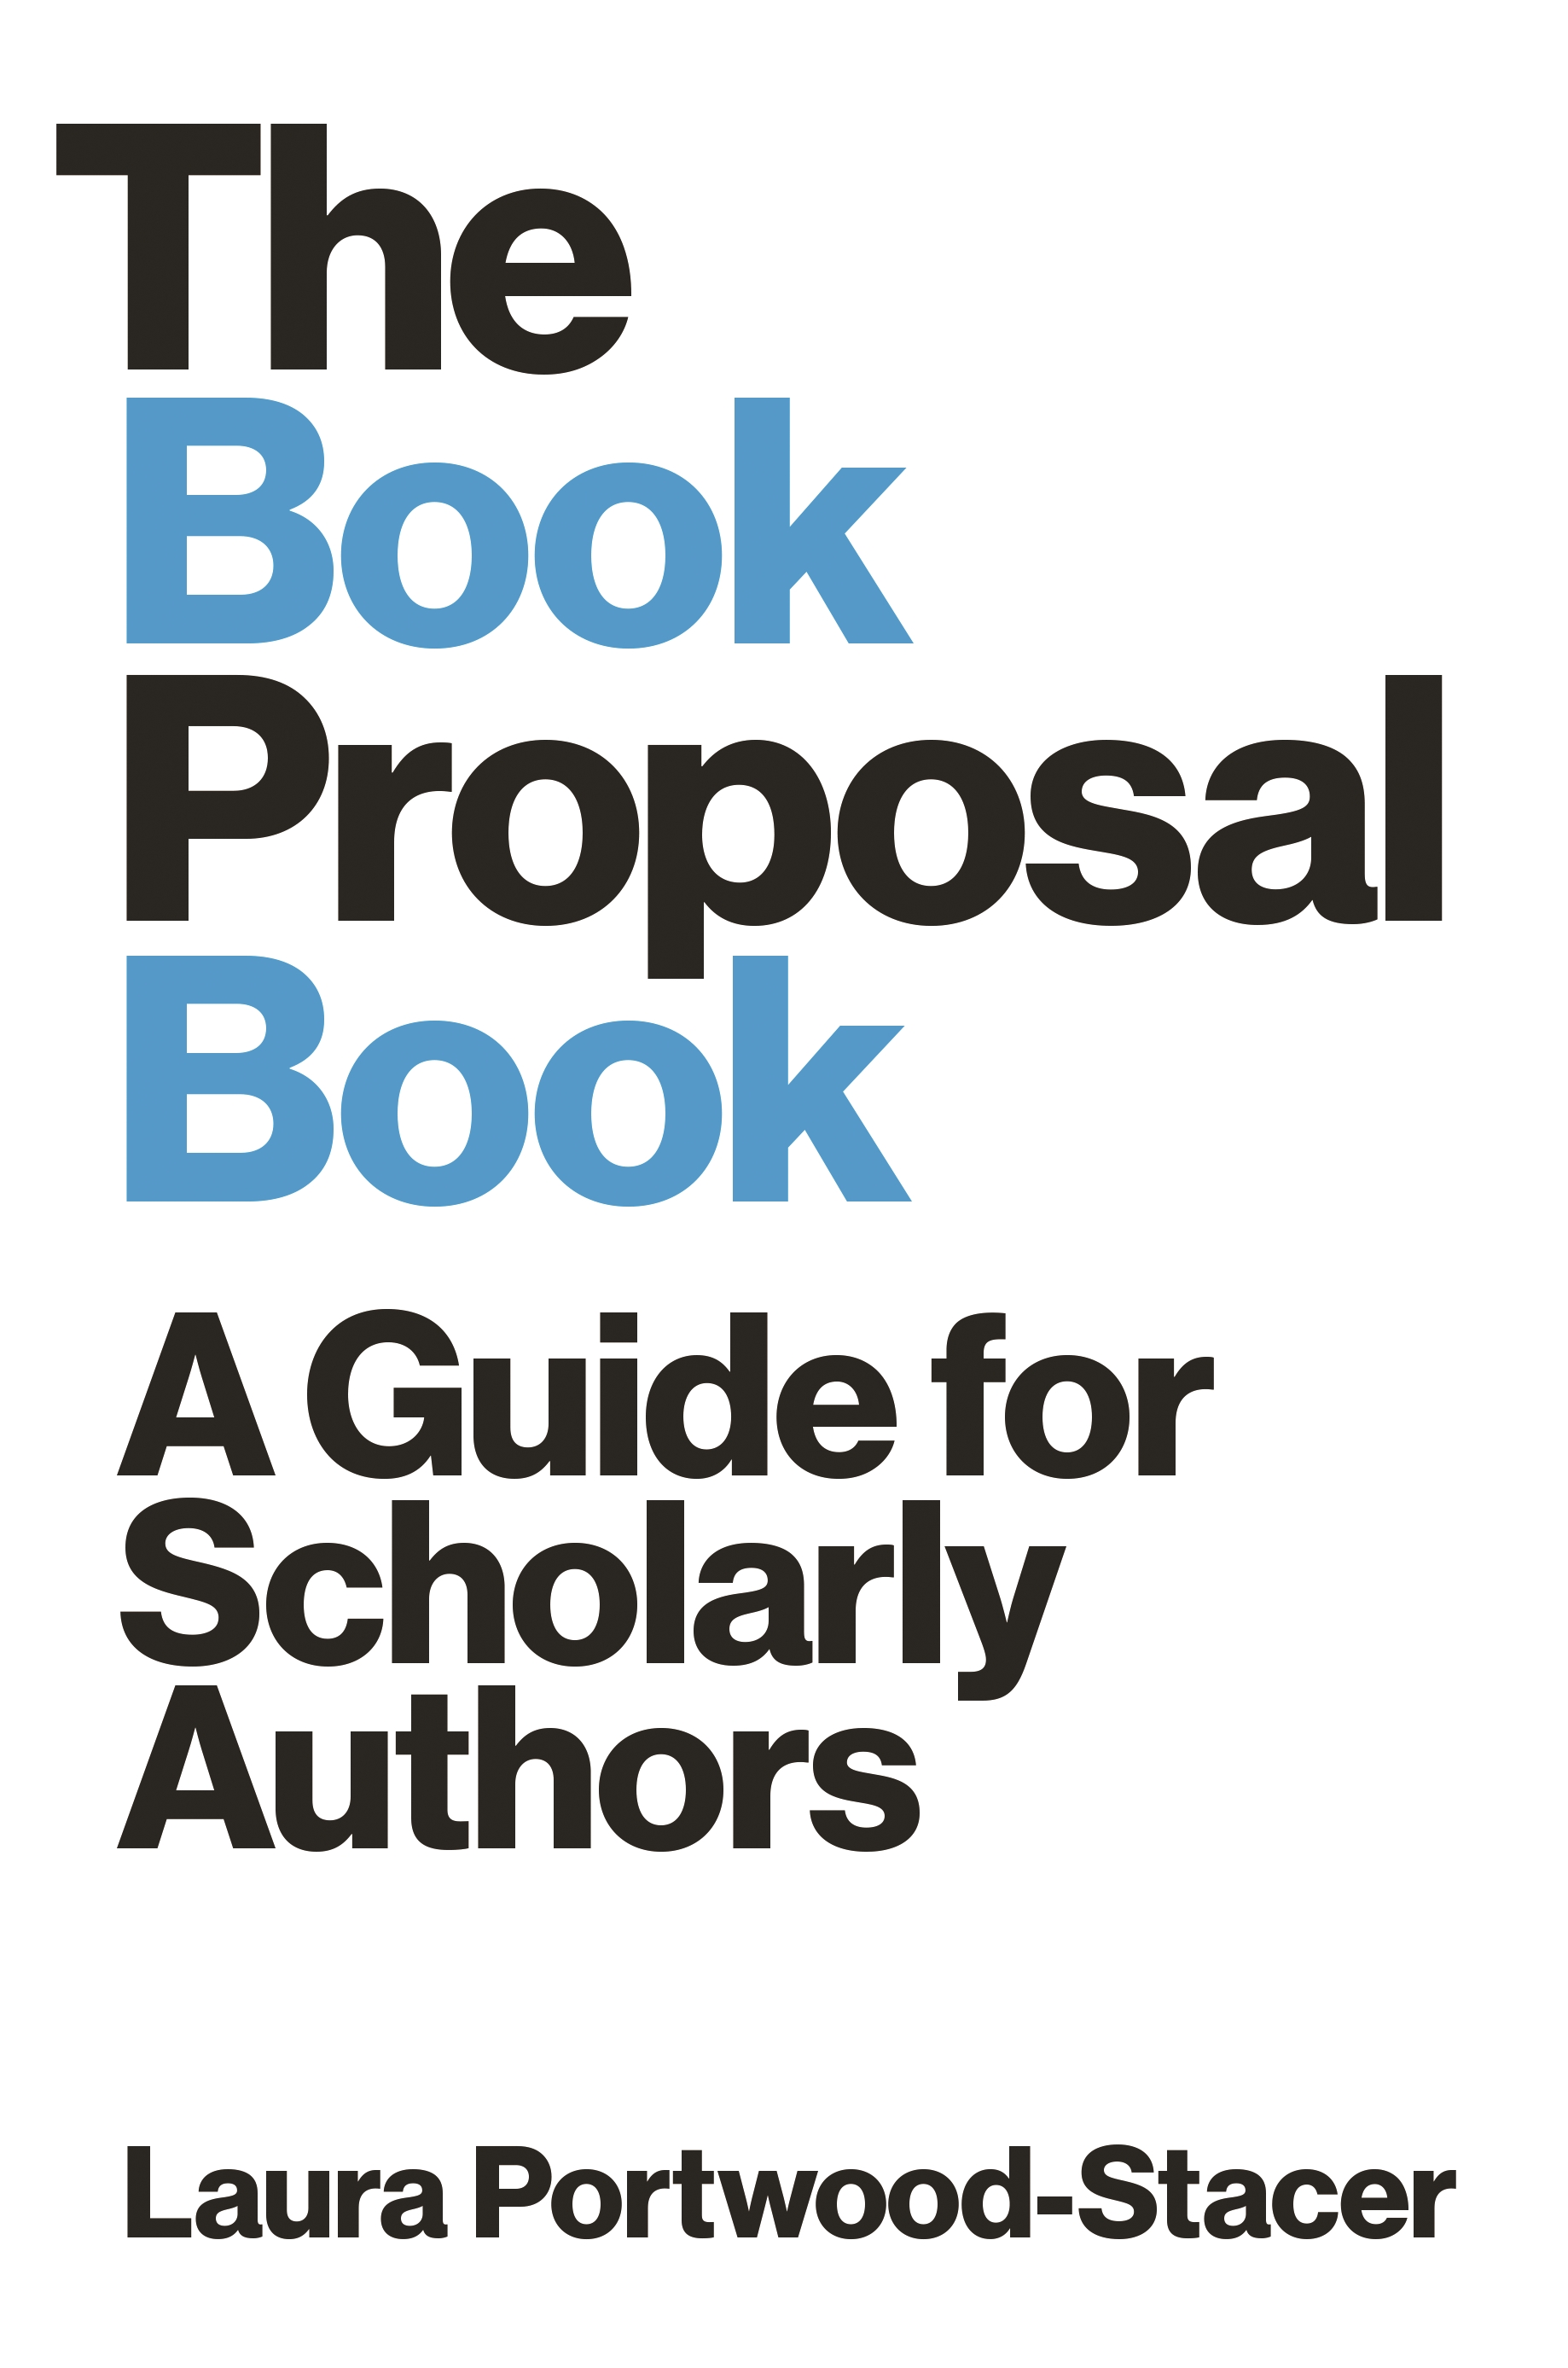 Cover image of The Book Proposal Book: A Guide for Scholarly Authors, by Laura Portwood-Stacer